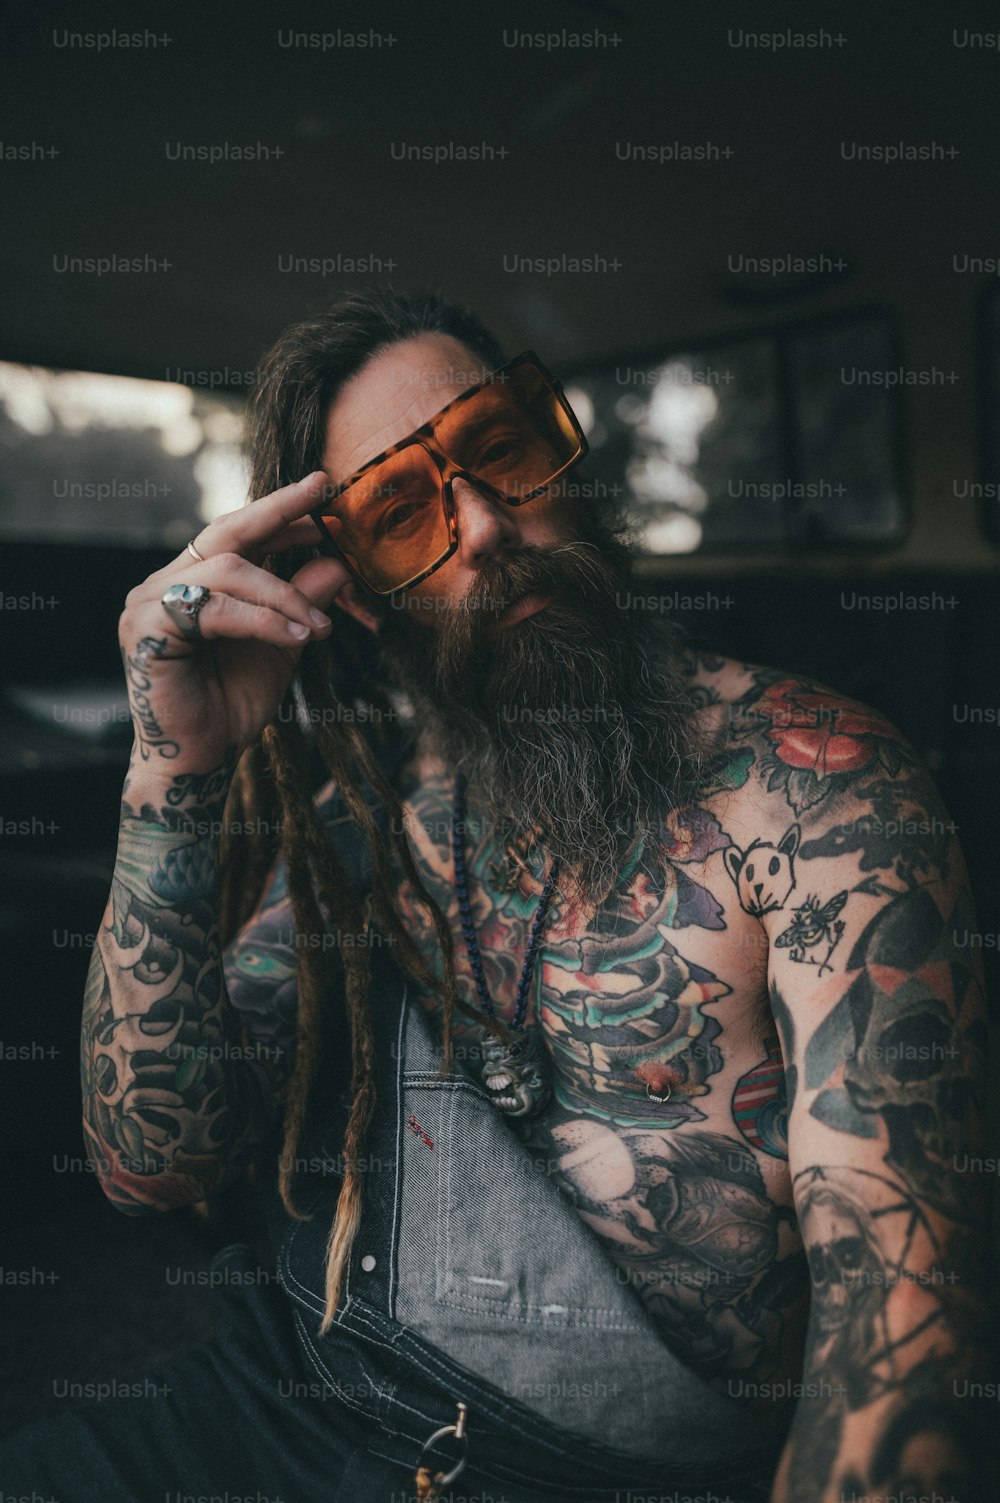 a man with a beard and tattoos holding a pair of sunglasses